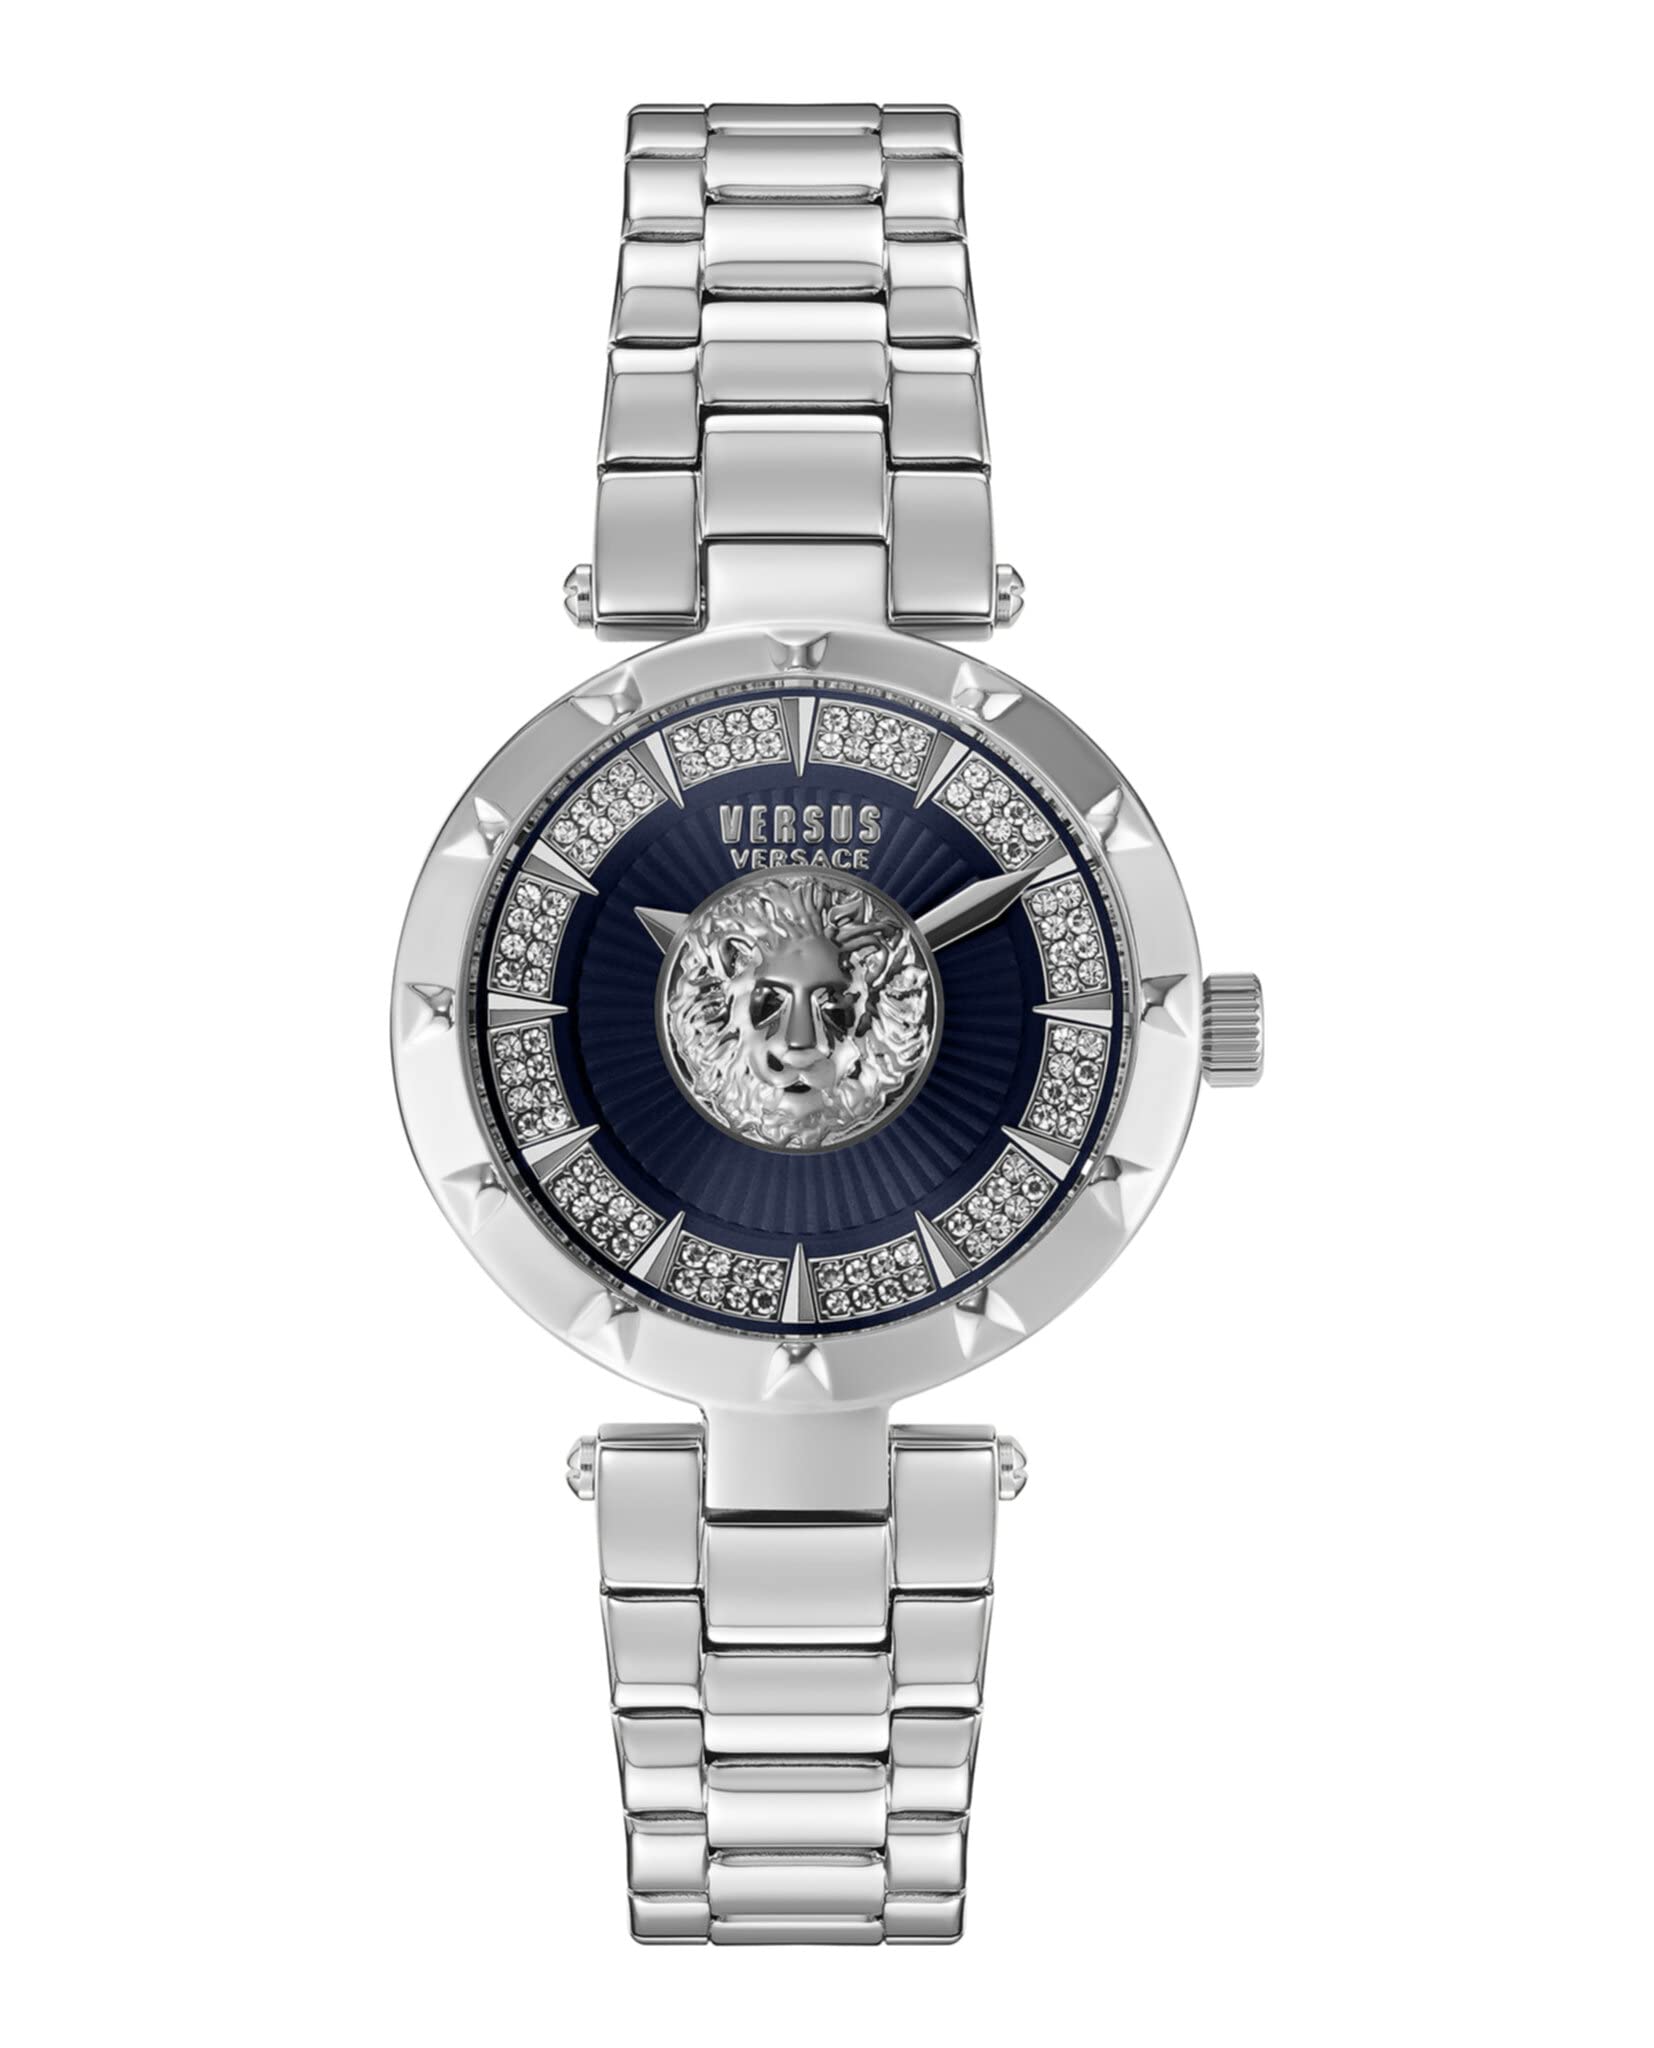 Versus Versace Sertie Collection Luxury Womens Watch Timepiece with a Silver Bracelet Featuring a Stainless Steel Case and Blue Dial